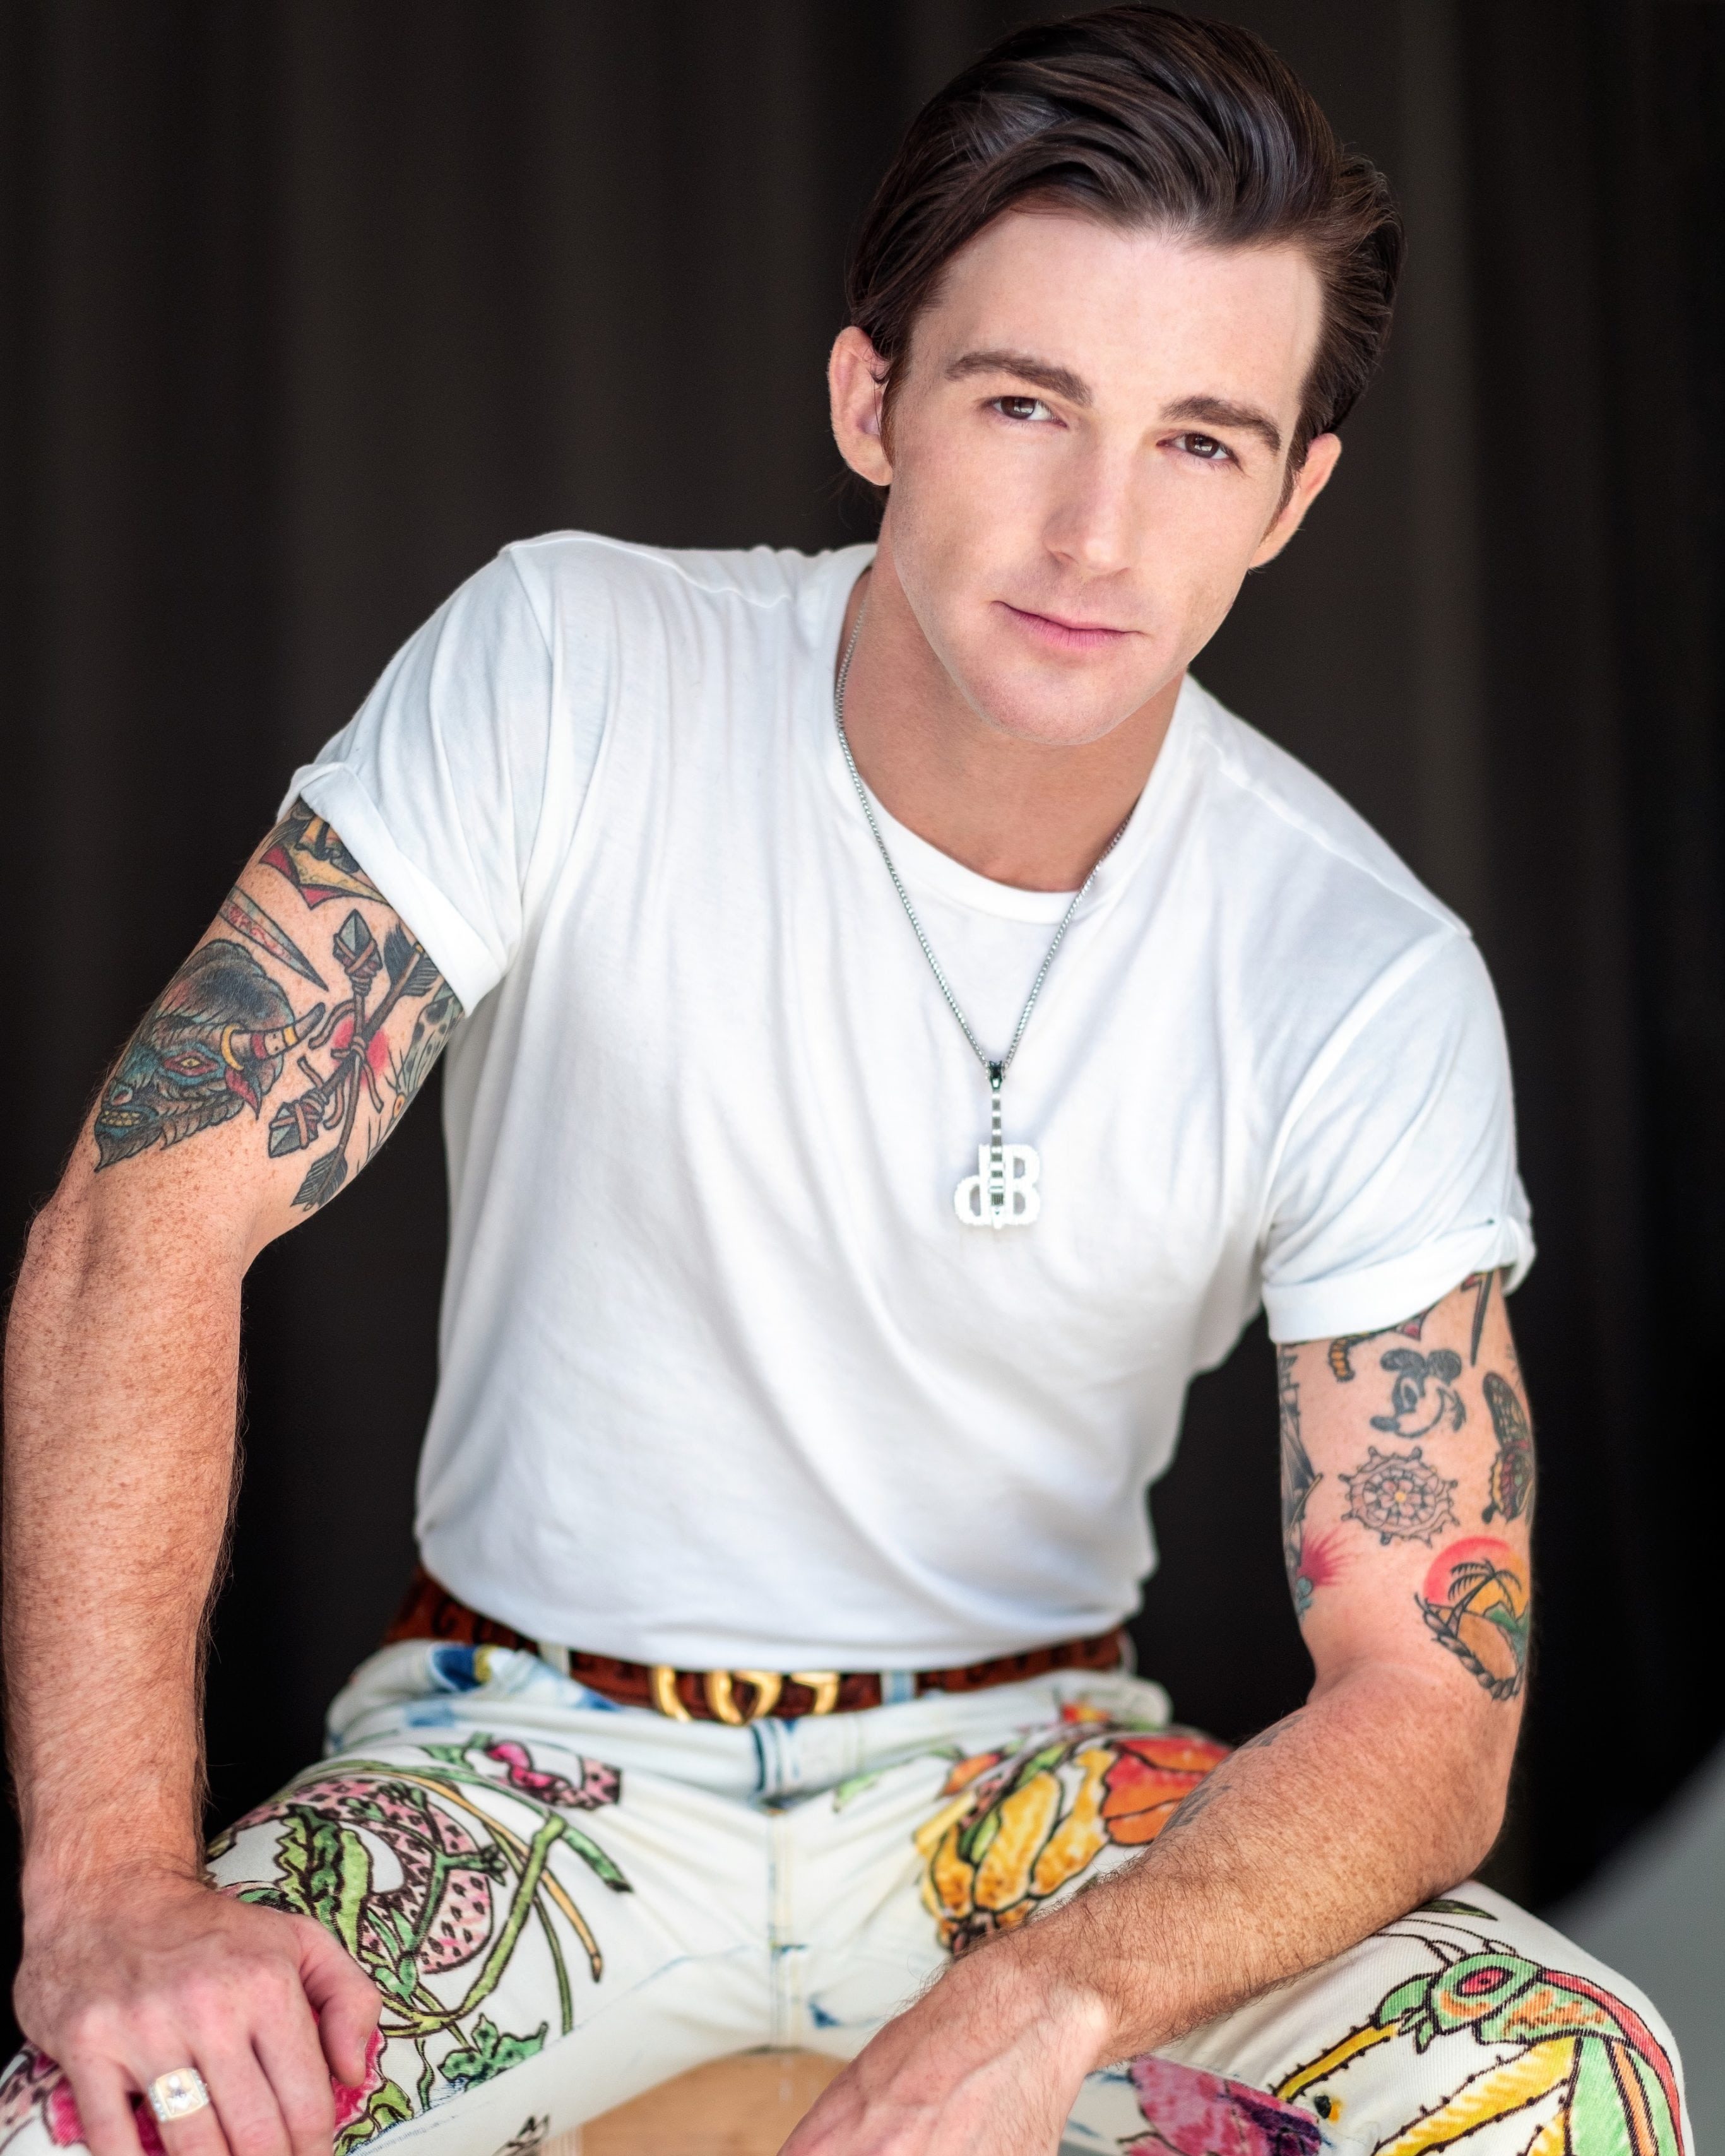 We Spoke to Drake Bell About His Growing Music Career and the